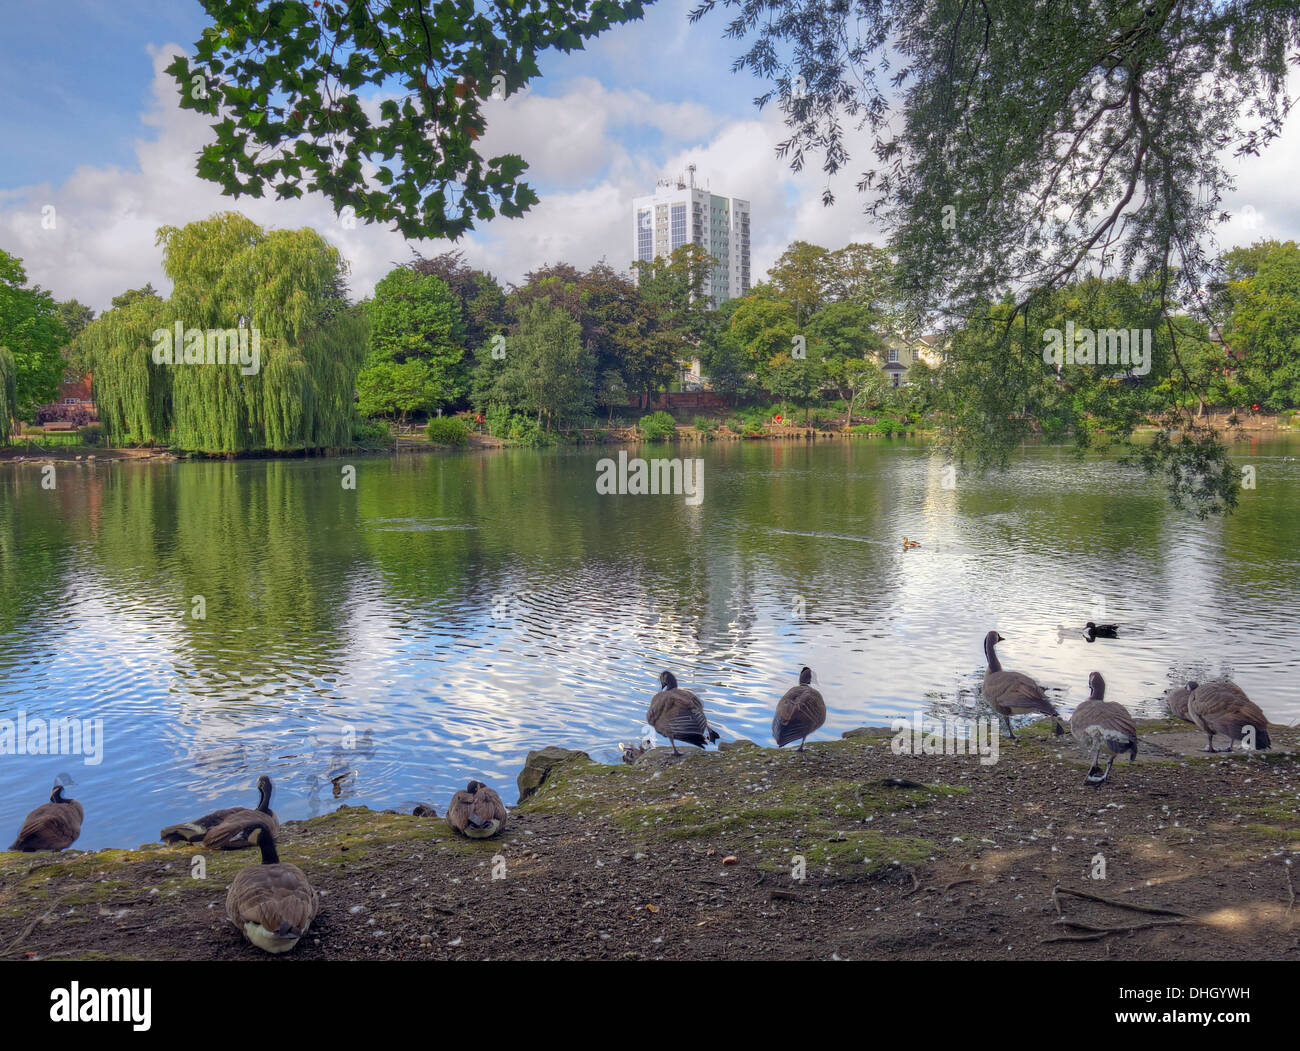 The Arbo, Walsall Town Arboretum Park Pond , West Midlands England , UK Stockfoto